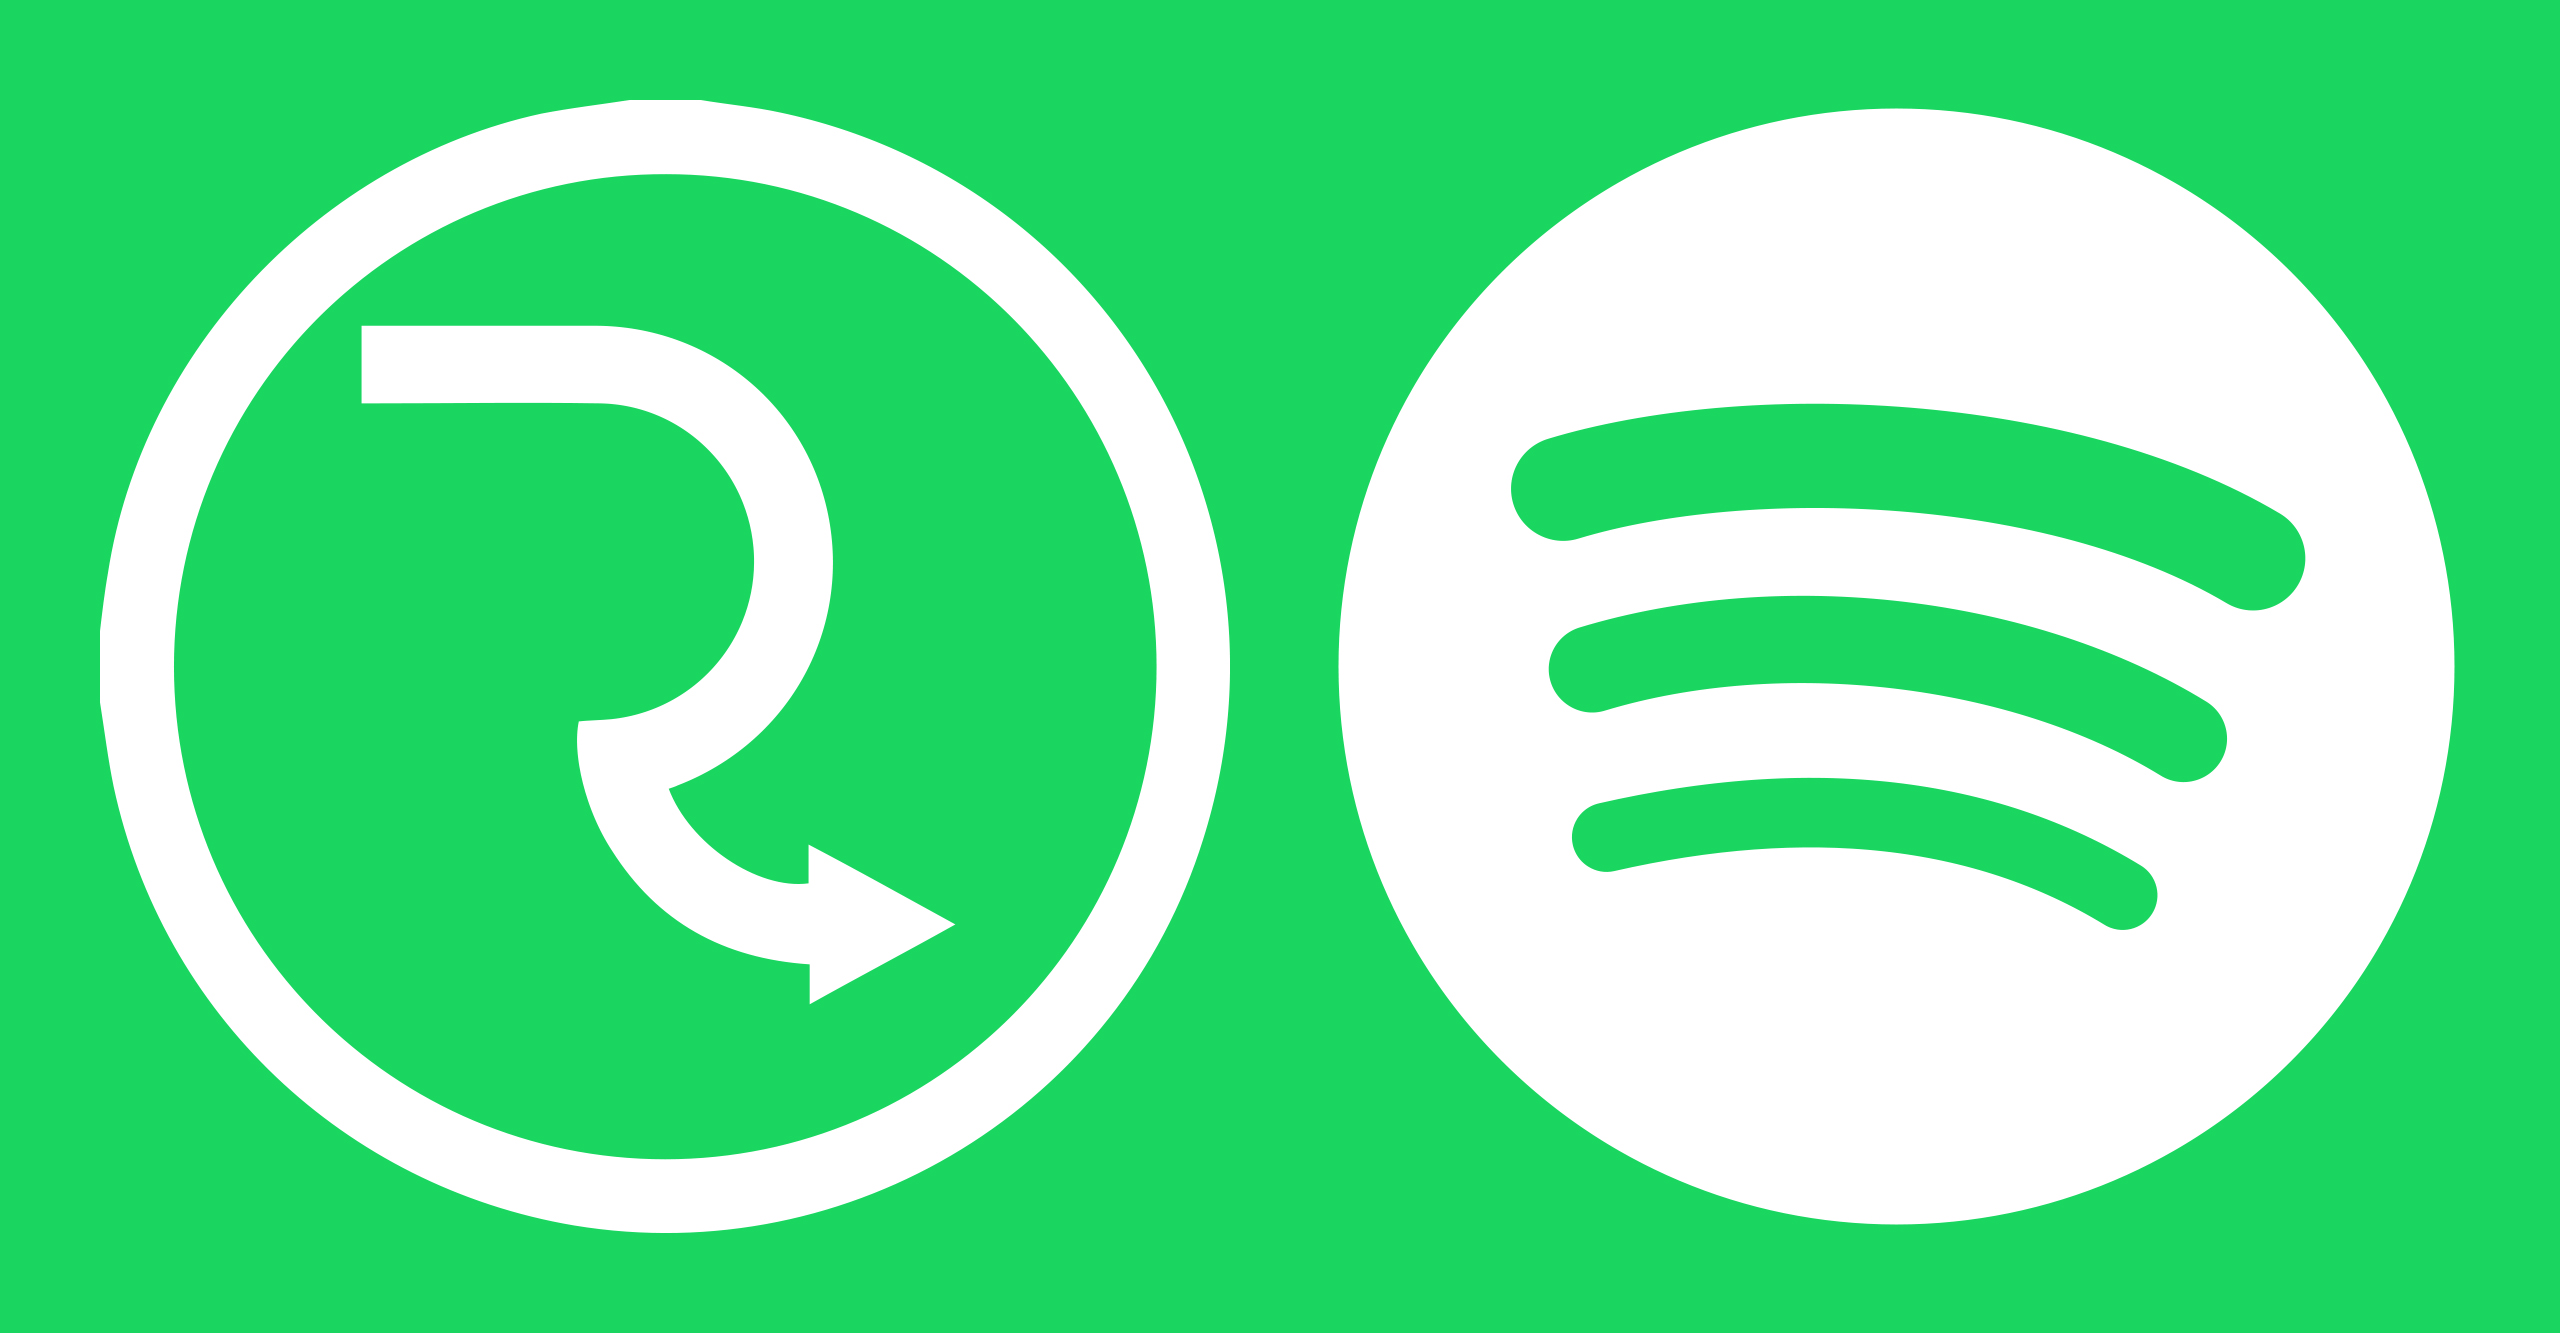 How to put my music on Spotify for free